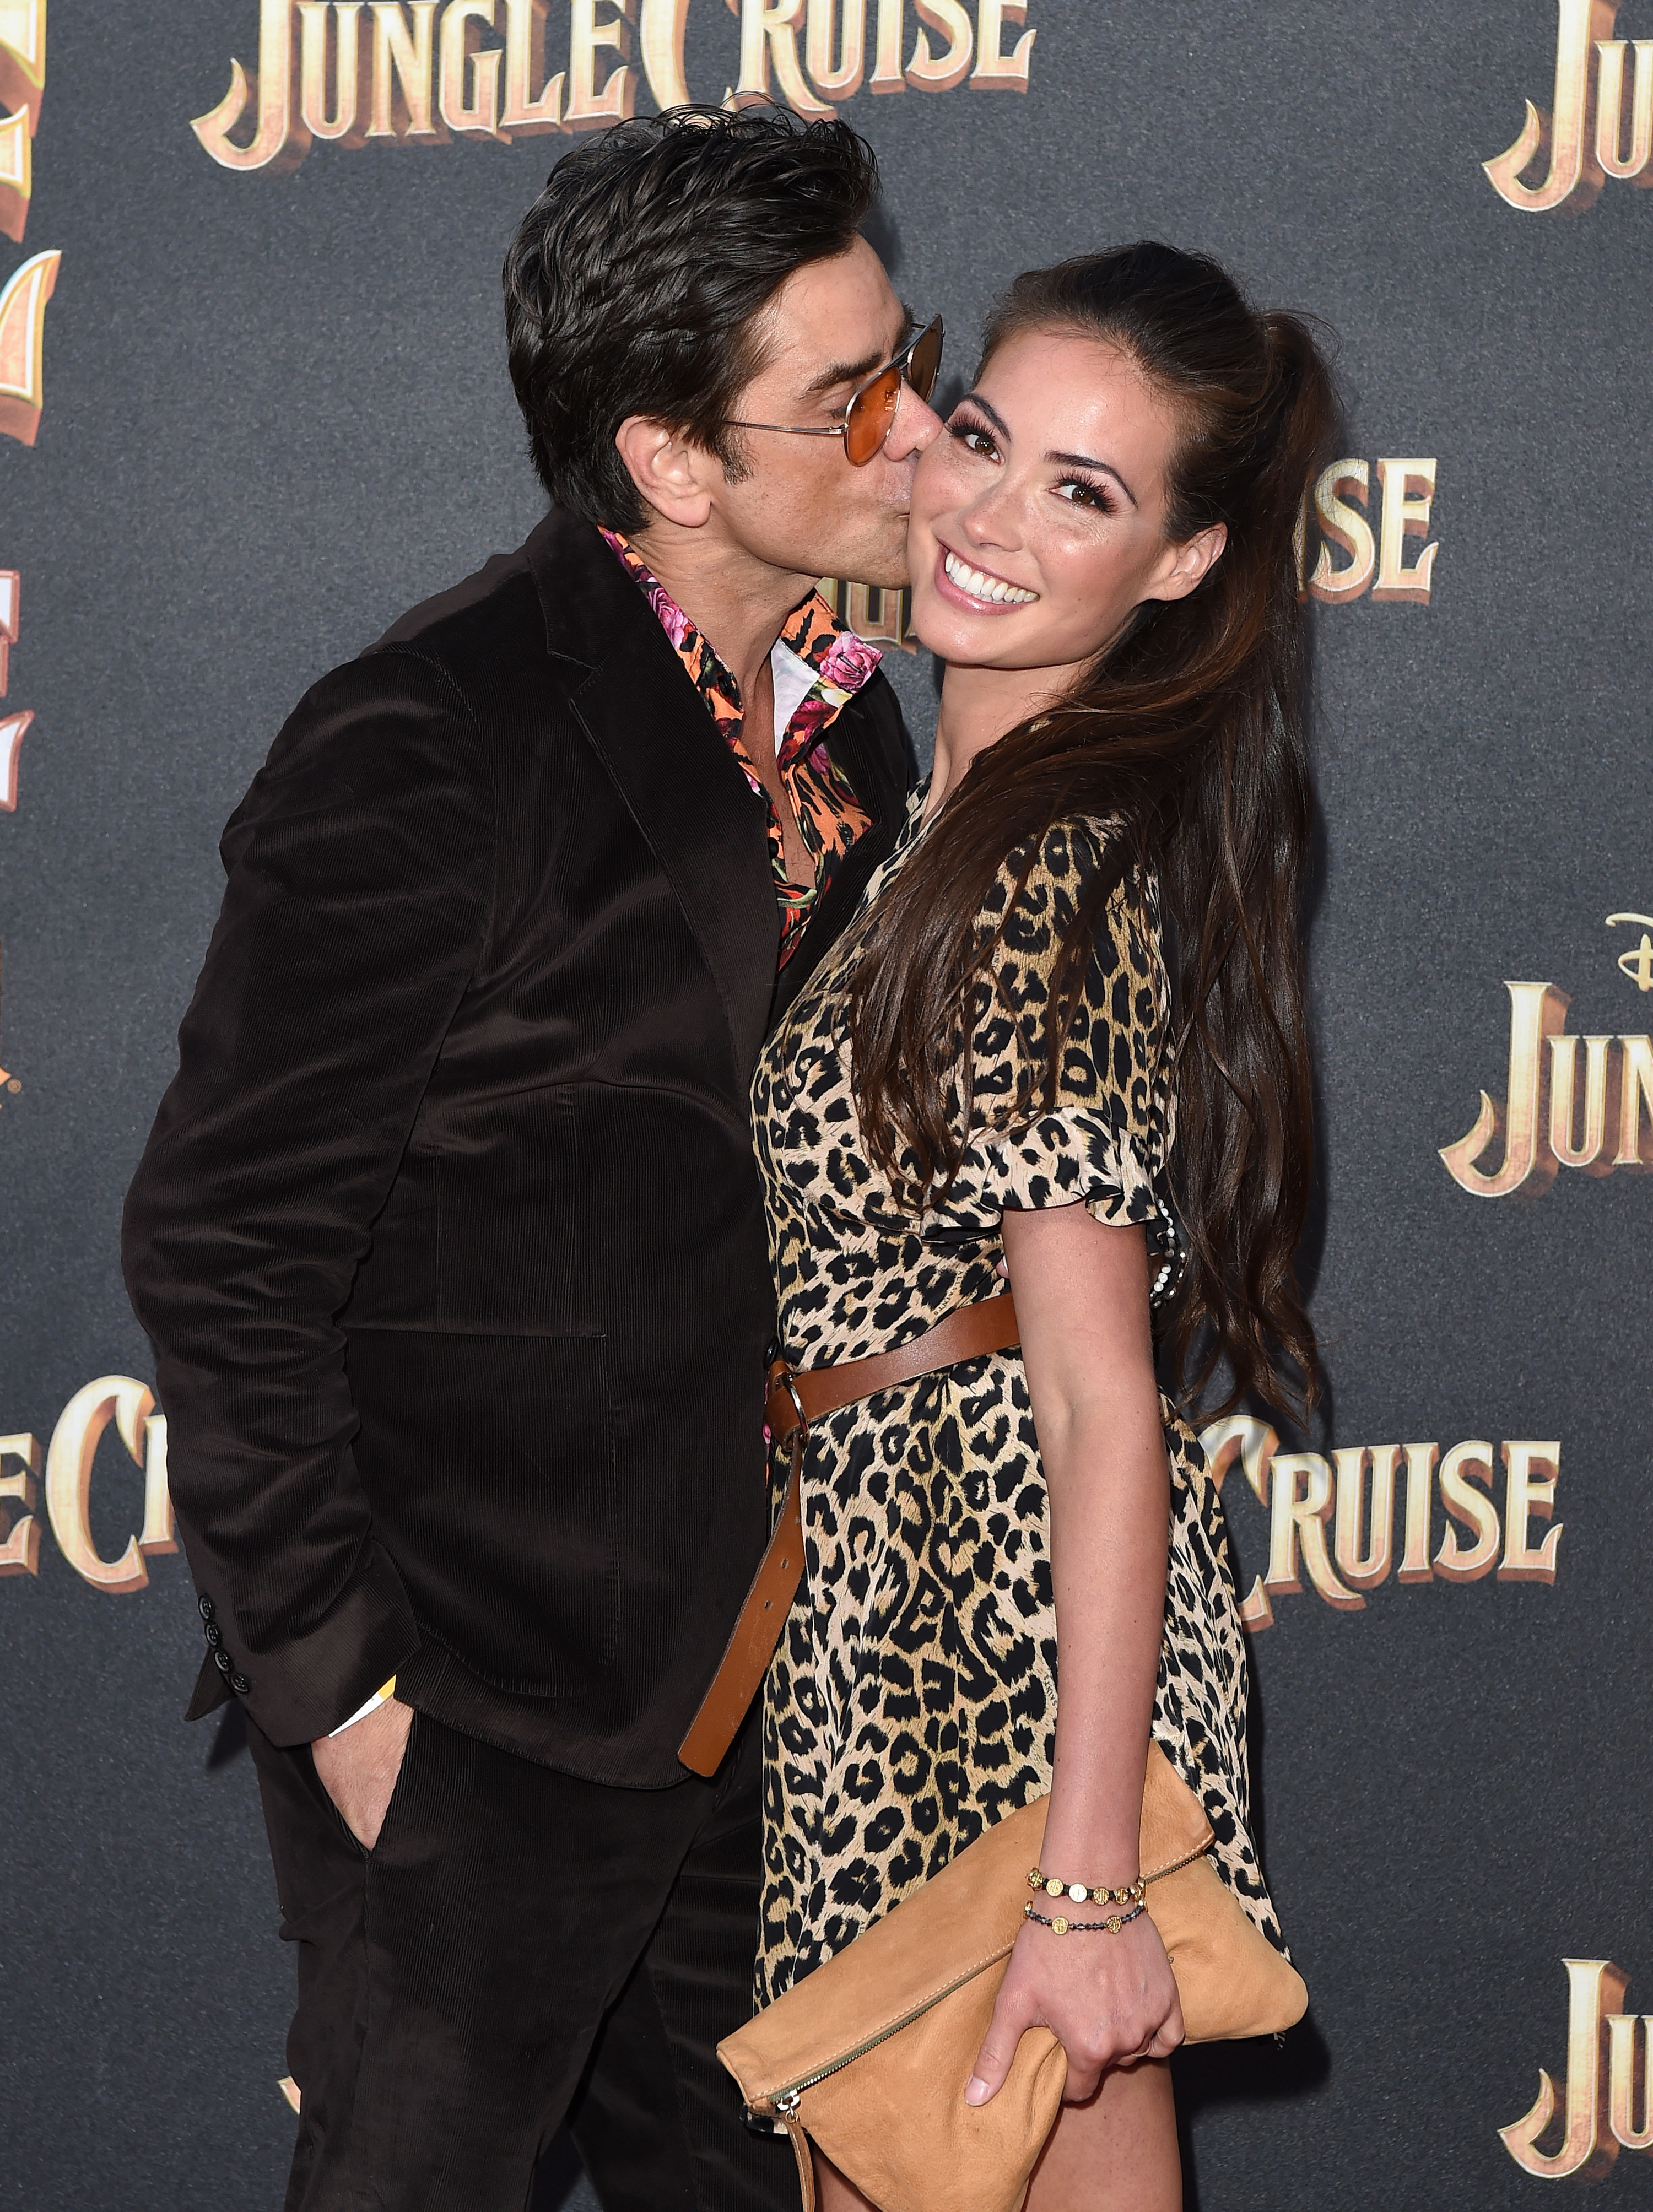 John Stamos and Caitlin McHugh on the red carpet